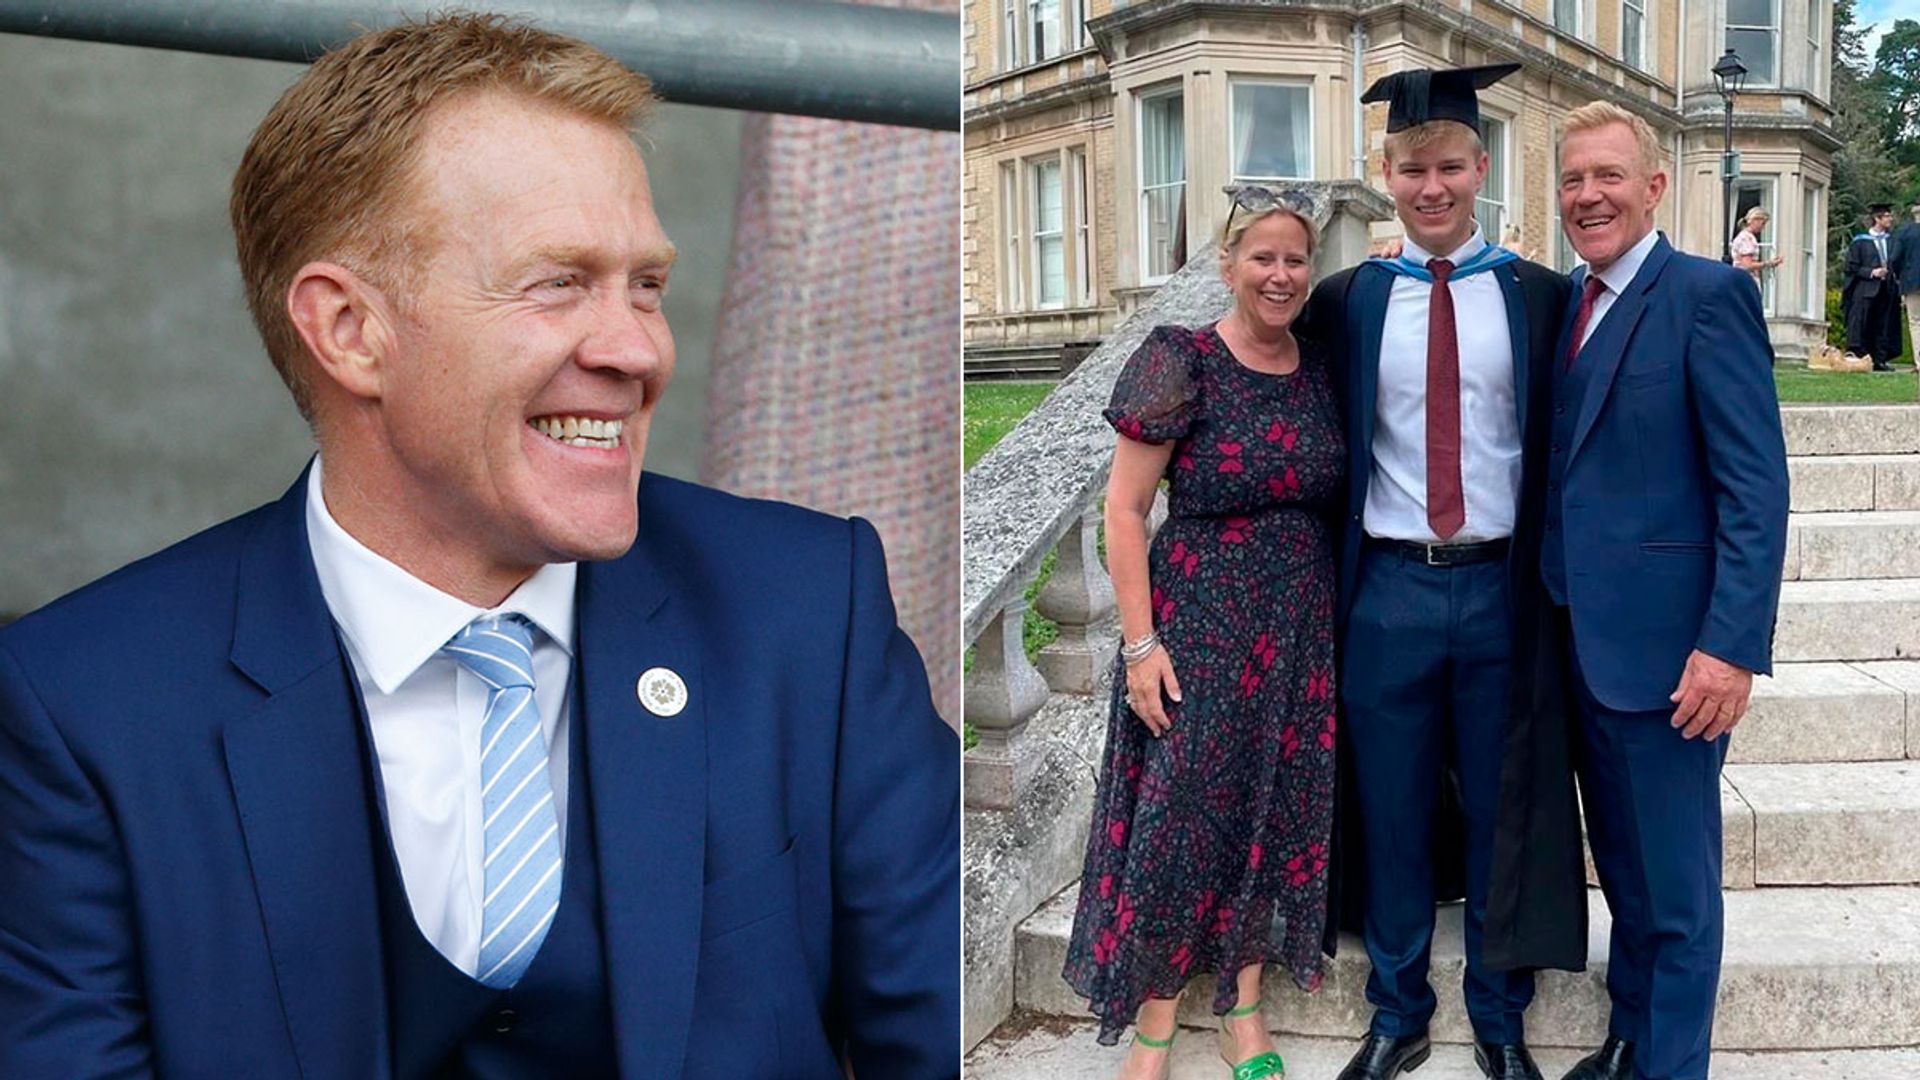 Inside Countryfile star Adam Henson's family life: From his lookalike son to his secret wedding